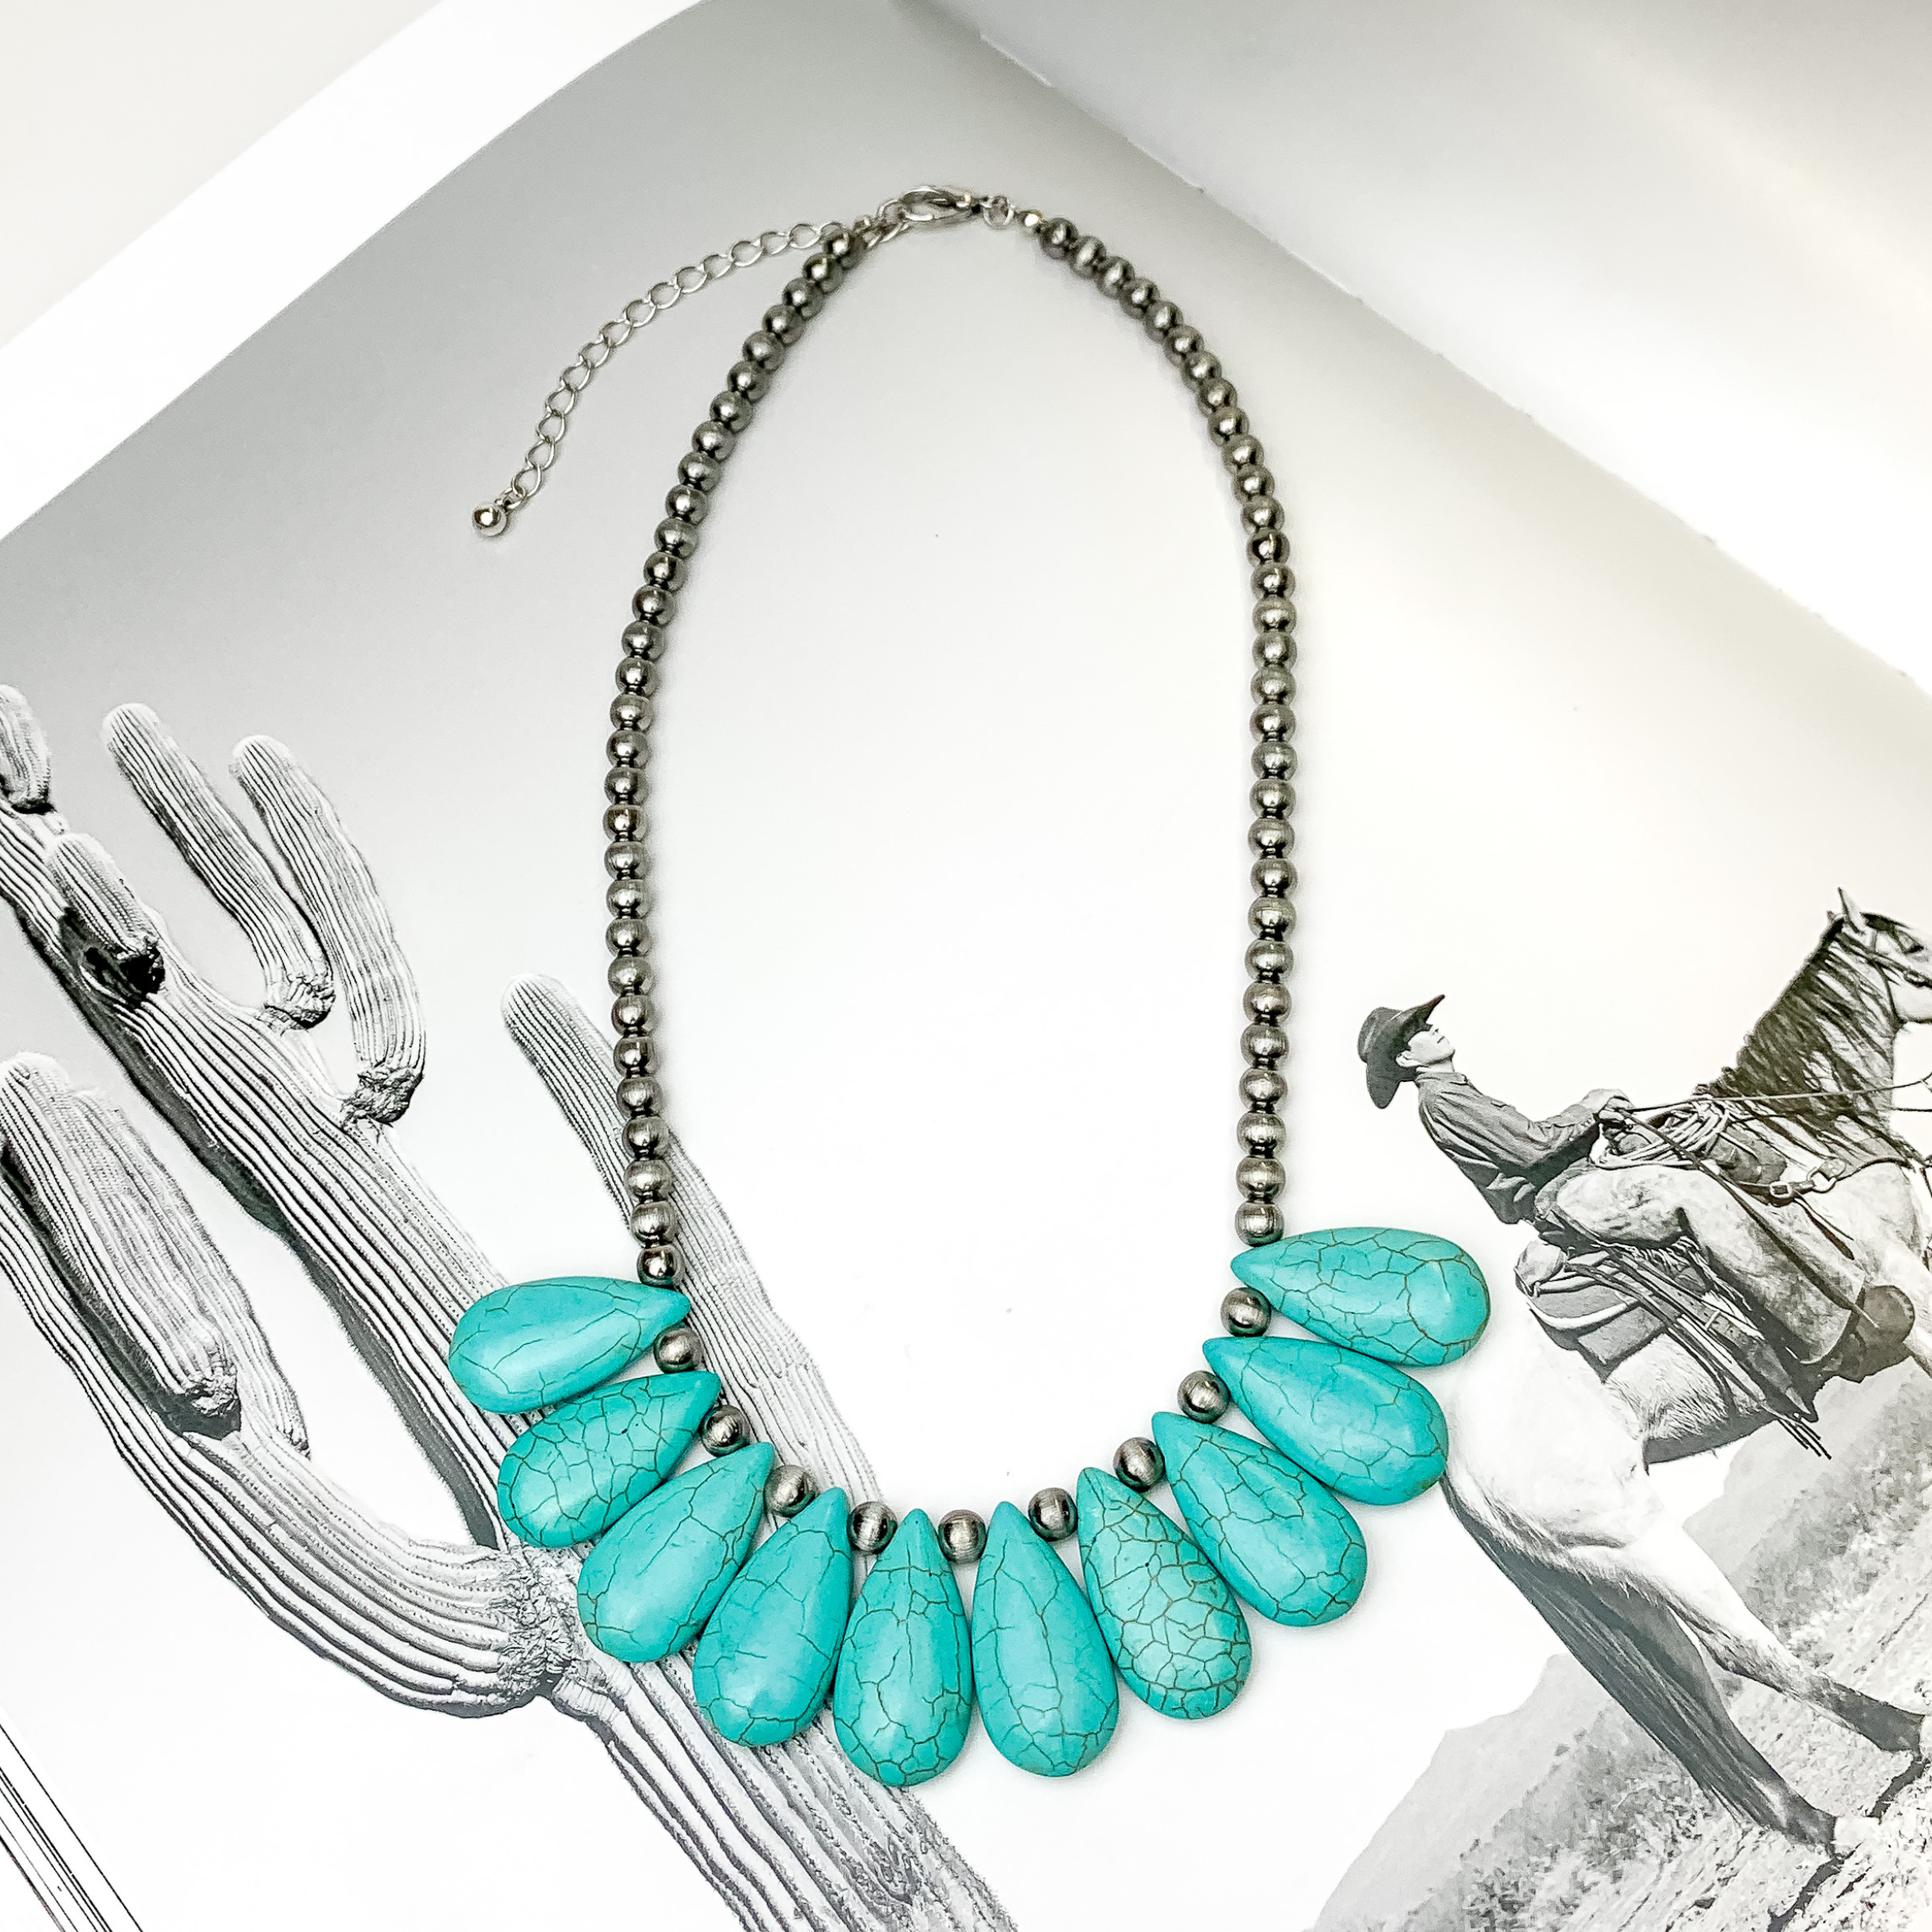 Silver beaded necklace with ten turquoise teardrop beads. This necklace is pictured on an open black and white western picture book. 